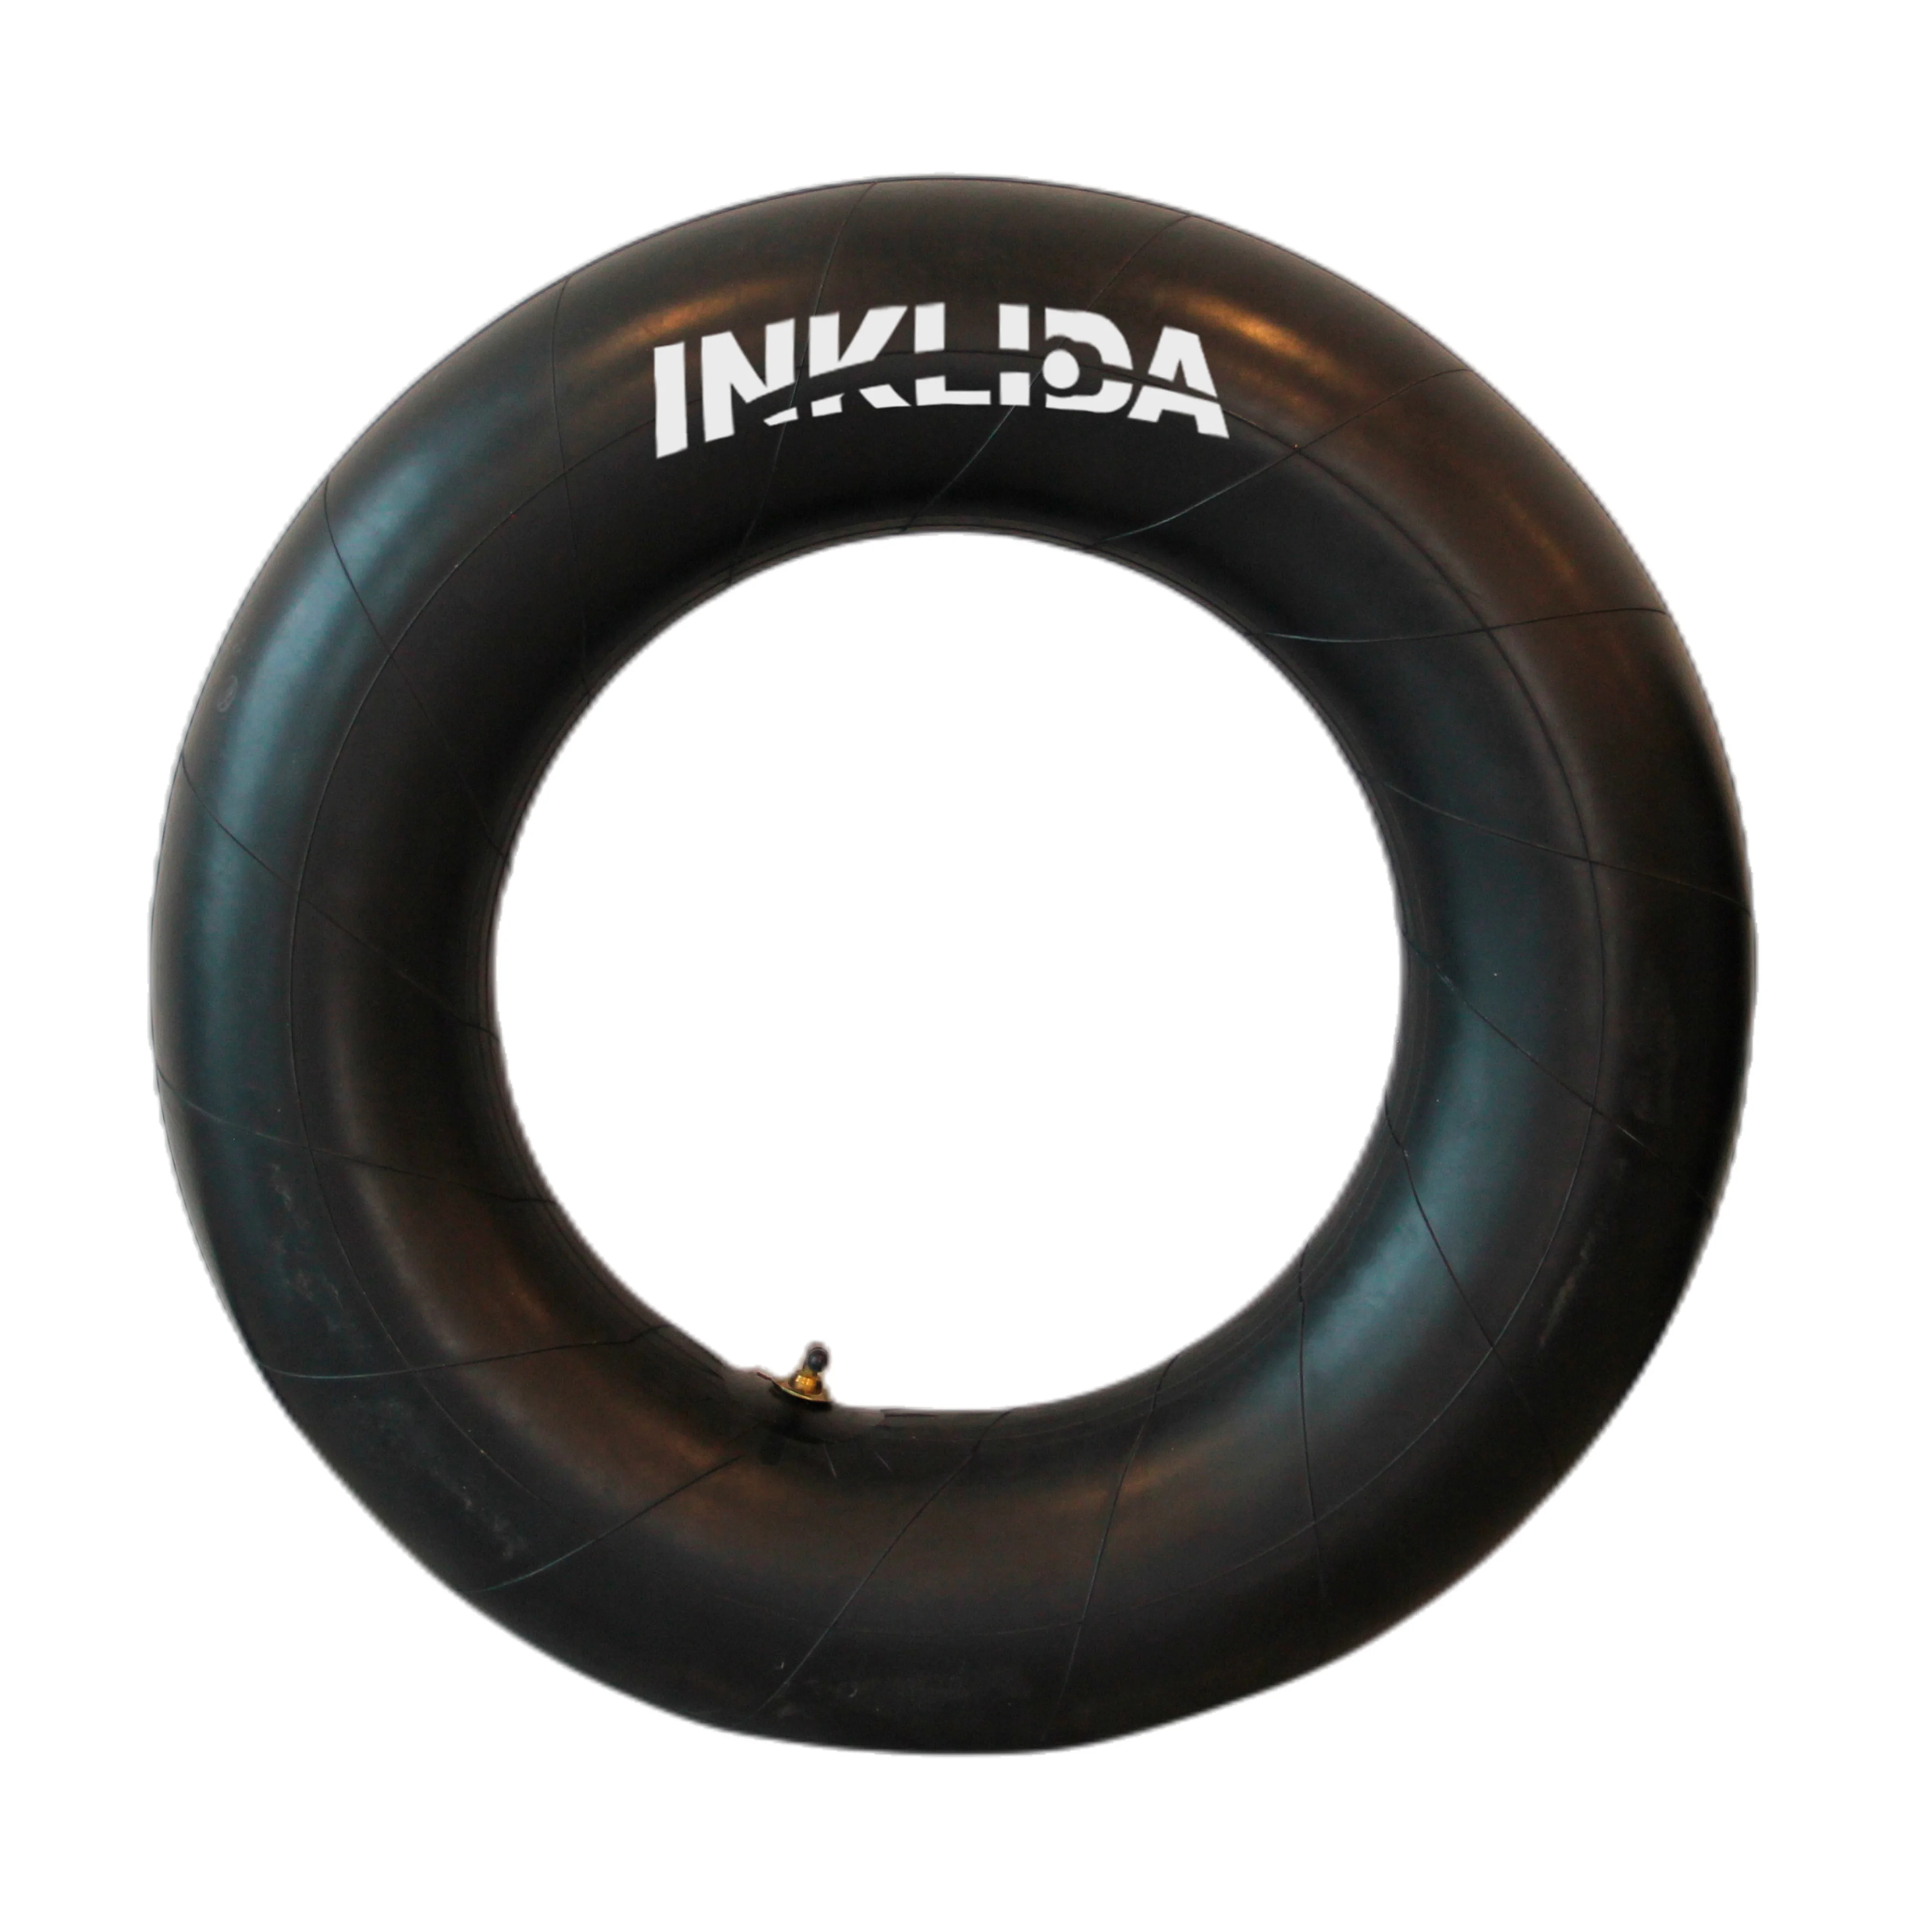 INKLIDA Heavy Duty Anti aging Long Service Life Truck/Light Truck Tire Inner Tube 1200R24 TR78A (1600660969172)